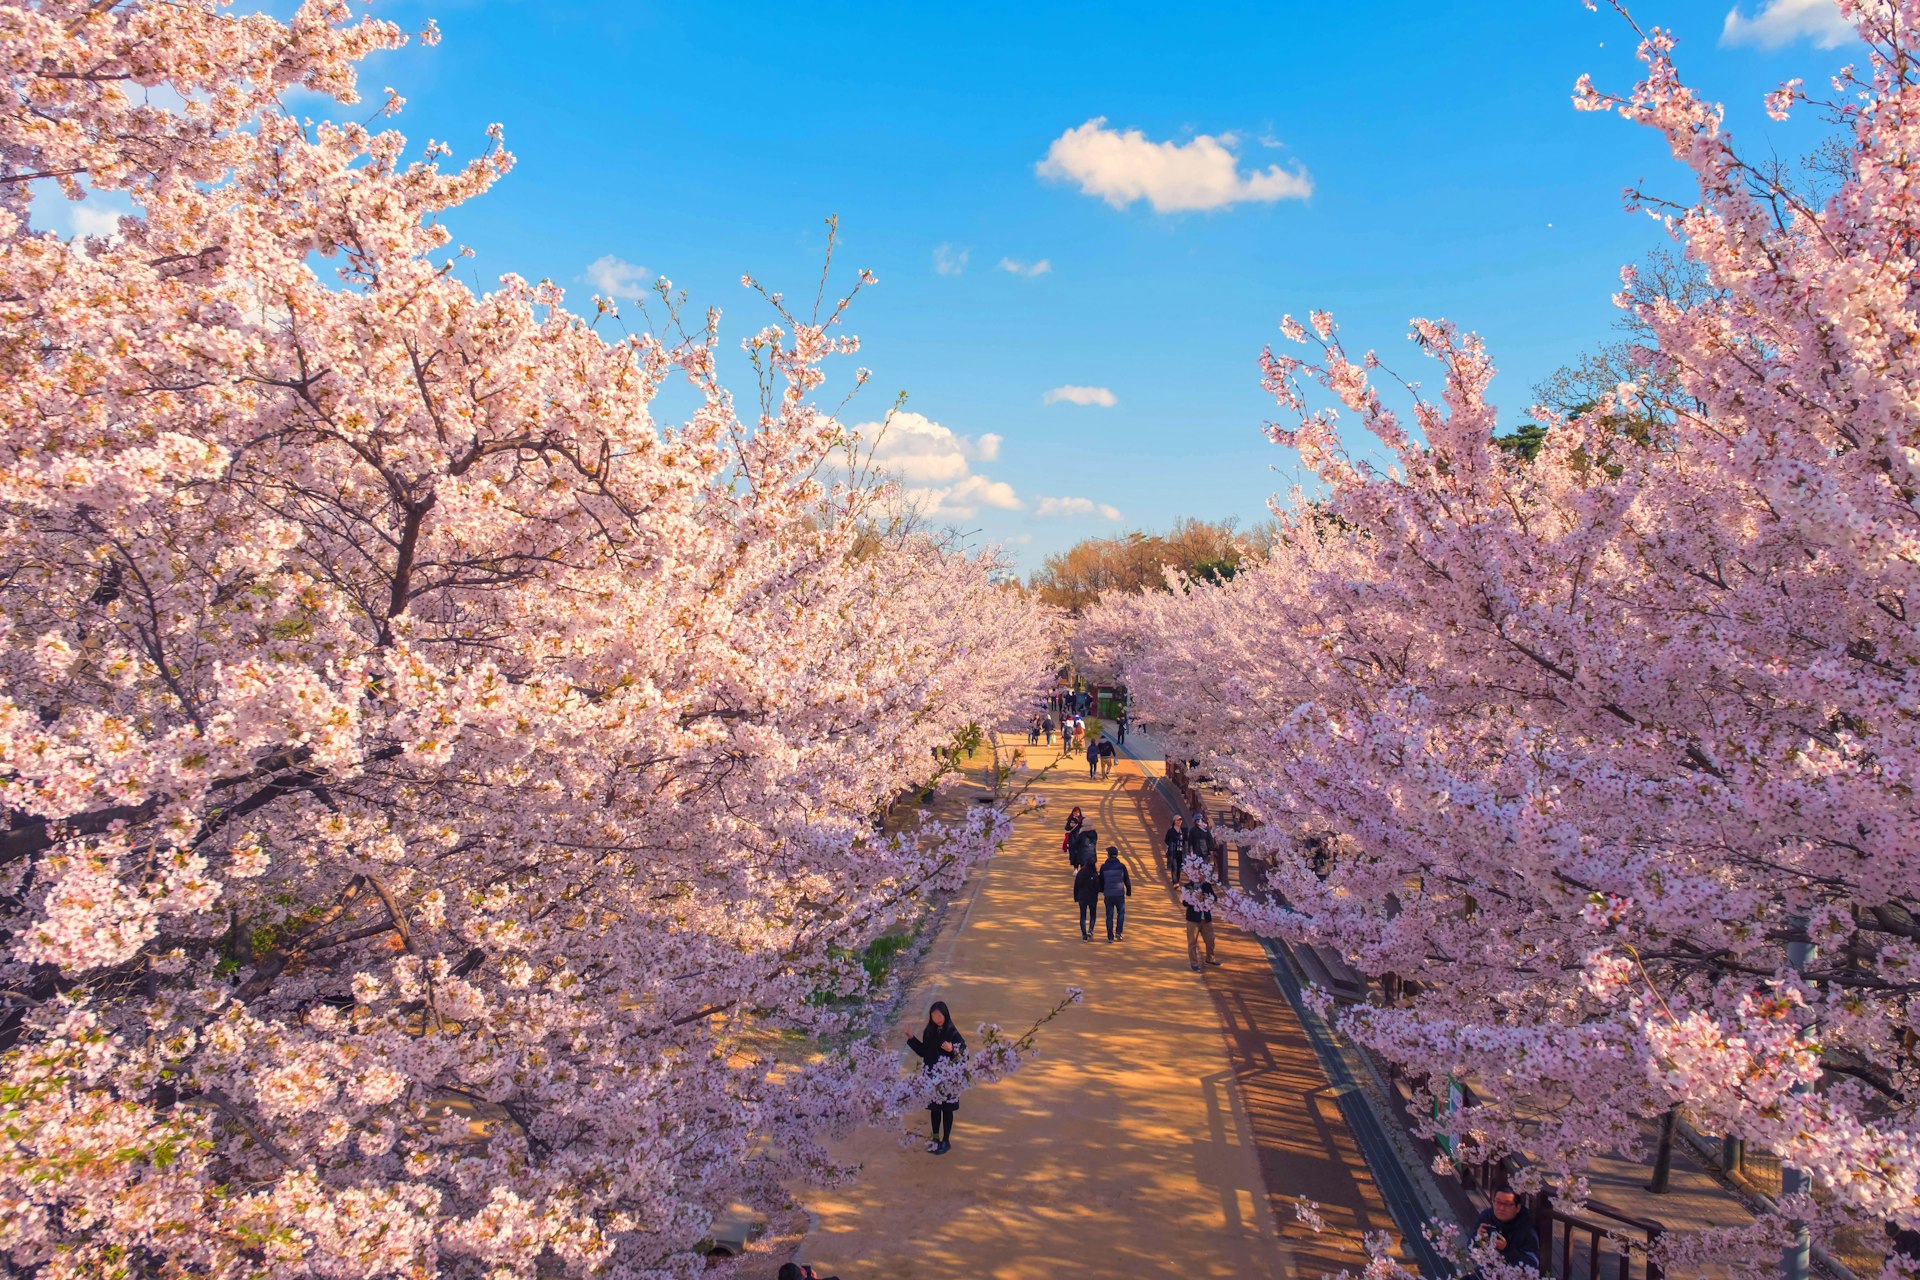 People walk among cherry blossoms in spring at Seoul Forest public park, Seoul, South Korea